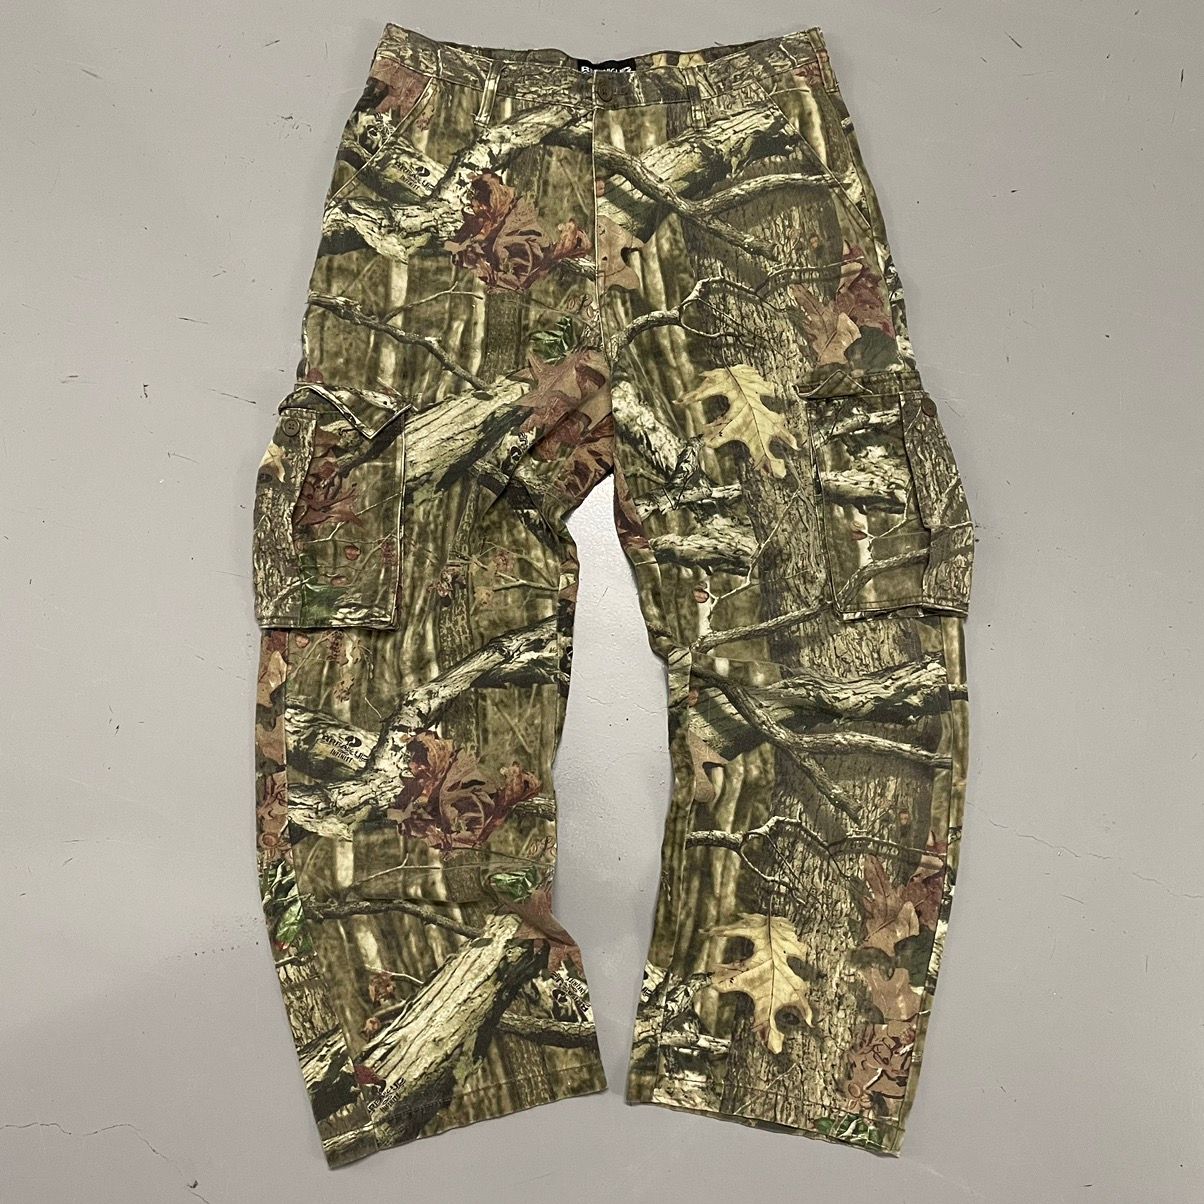 Pre-owned Camo X Realtree Crazy Vintage Y2k Realtree Camo Pants Carhartt Style Skater